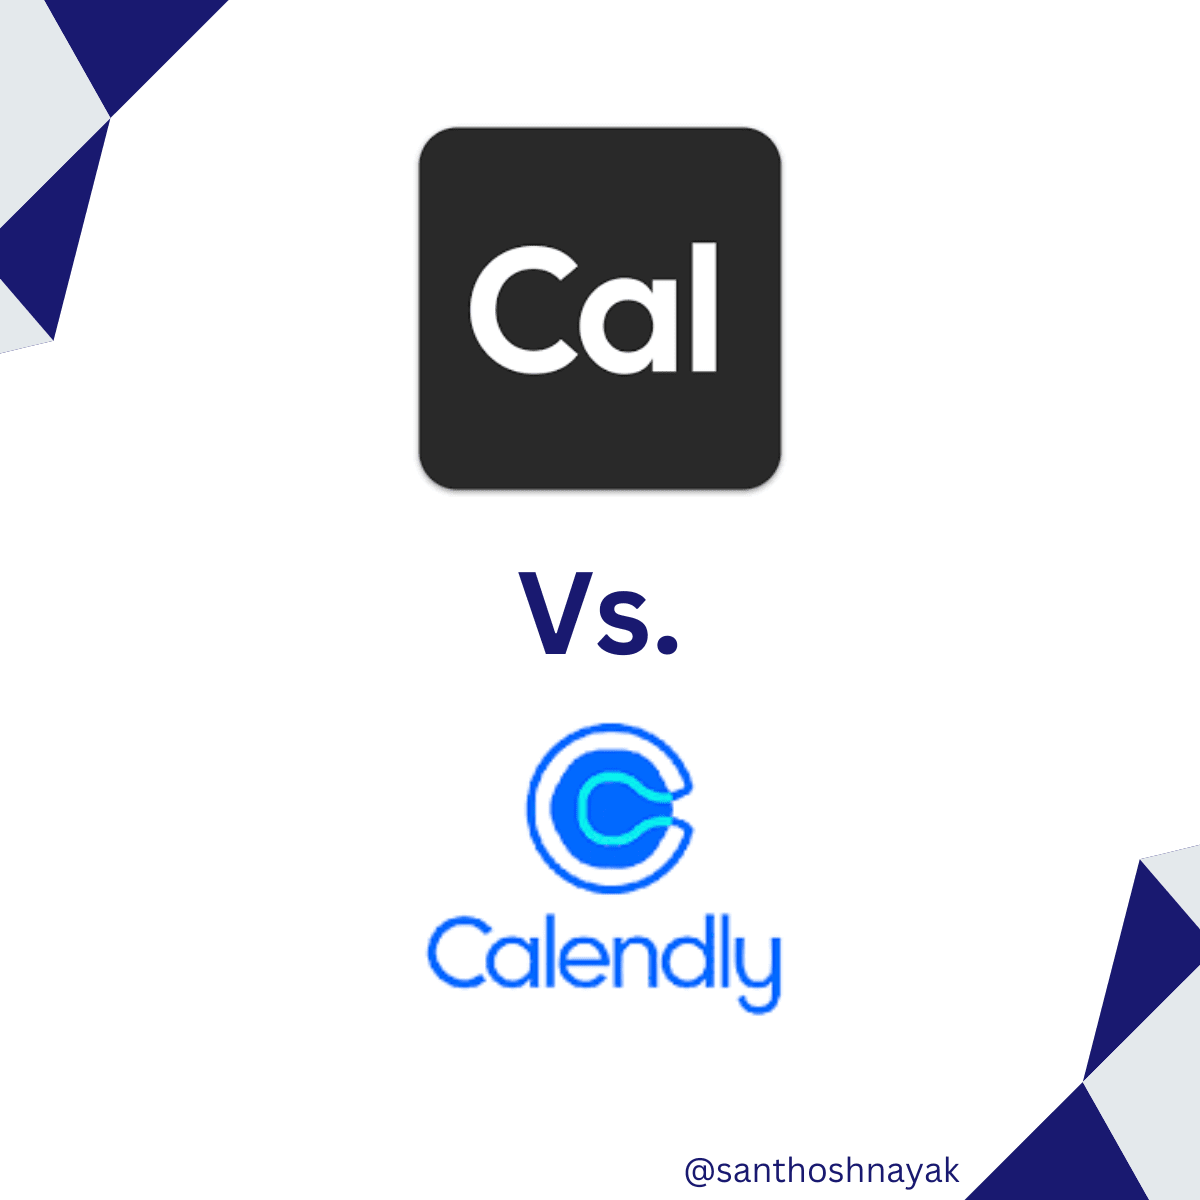 Why Cal com Is Better Than Calendly? #fuele Fueler